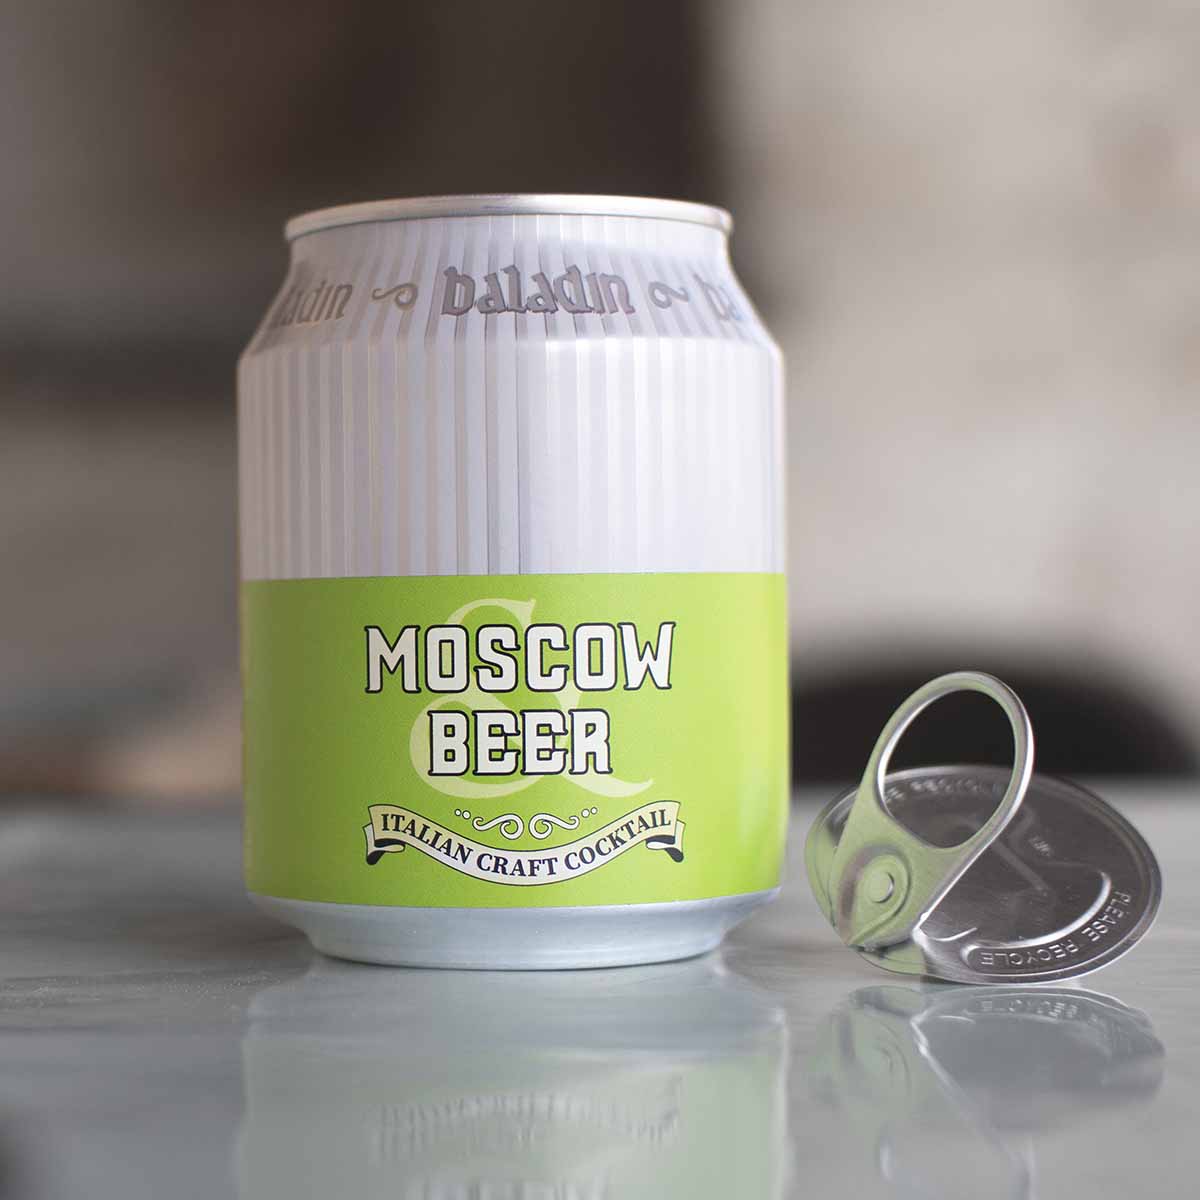 Moscow Beer – Selezione Baladin SRL eCommerce